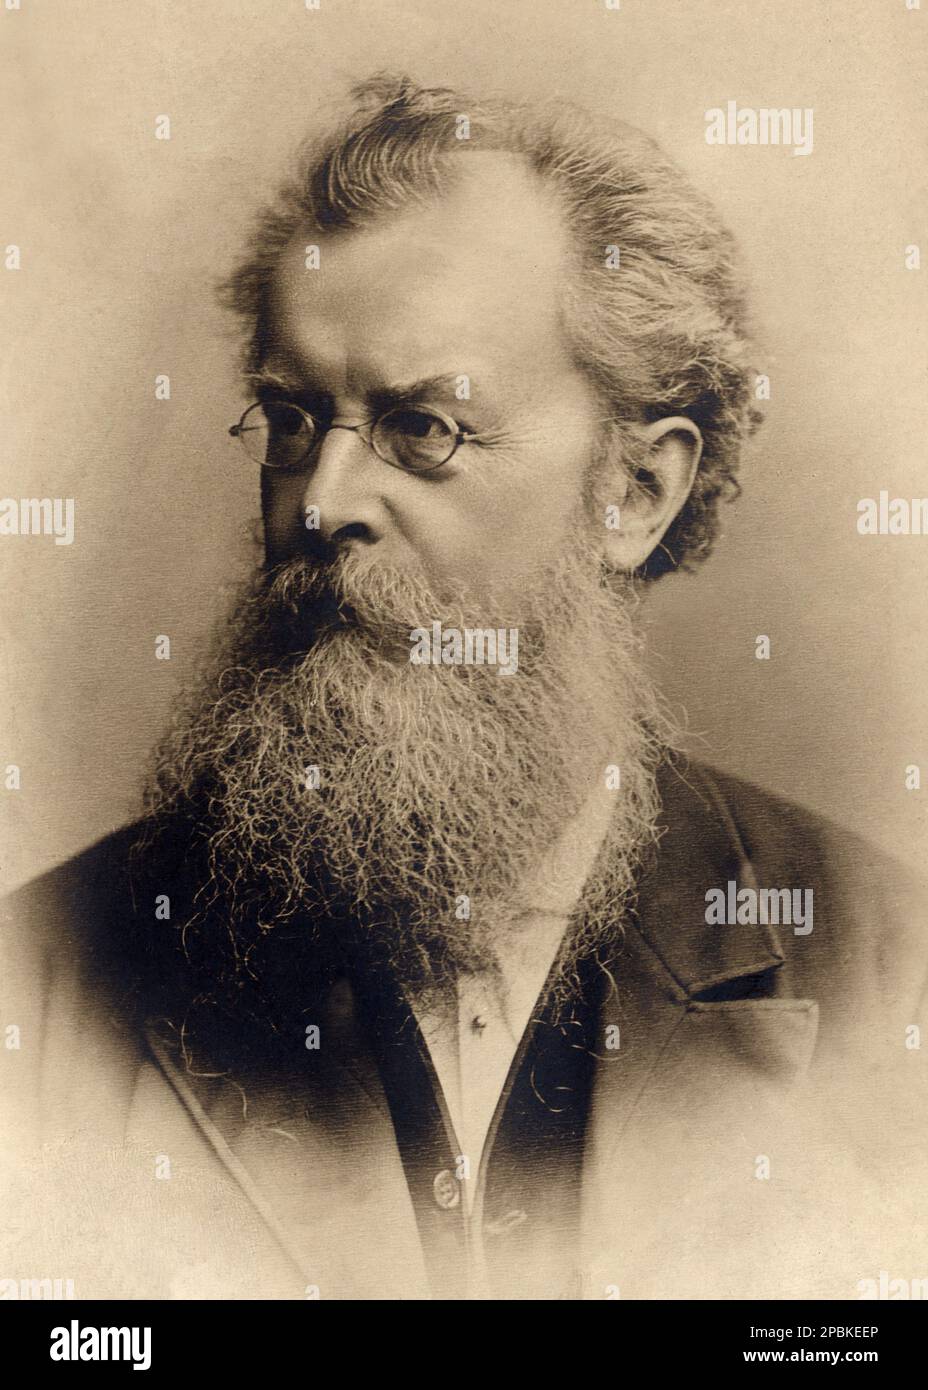 The german  historian , lawyer,  author and historian FELIX DAHN ( 1834 - 1912 ). Dahn's writings were extremely influential in forming the conception of the European history unfolding during the first millennium . His works contributed to the foundation of National Socialism in Germany while encouraged a 'voelkisch avant-garde' who feared the supposed danger of ethnic mixing.- RAZZISMO - RACIST - NAZIONALISMO - NAZIONALISTA - NAZISMO - NAZISM - NAZI - WRITER - SCRITTORE  - LETTERATO - SCRITTORE - LETTERATURA - Literature - STORICO - beard - barba - GIURISTA - lens - occhiali da vista  ----  A Stock Photo